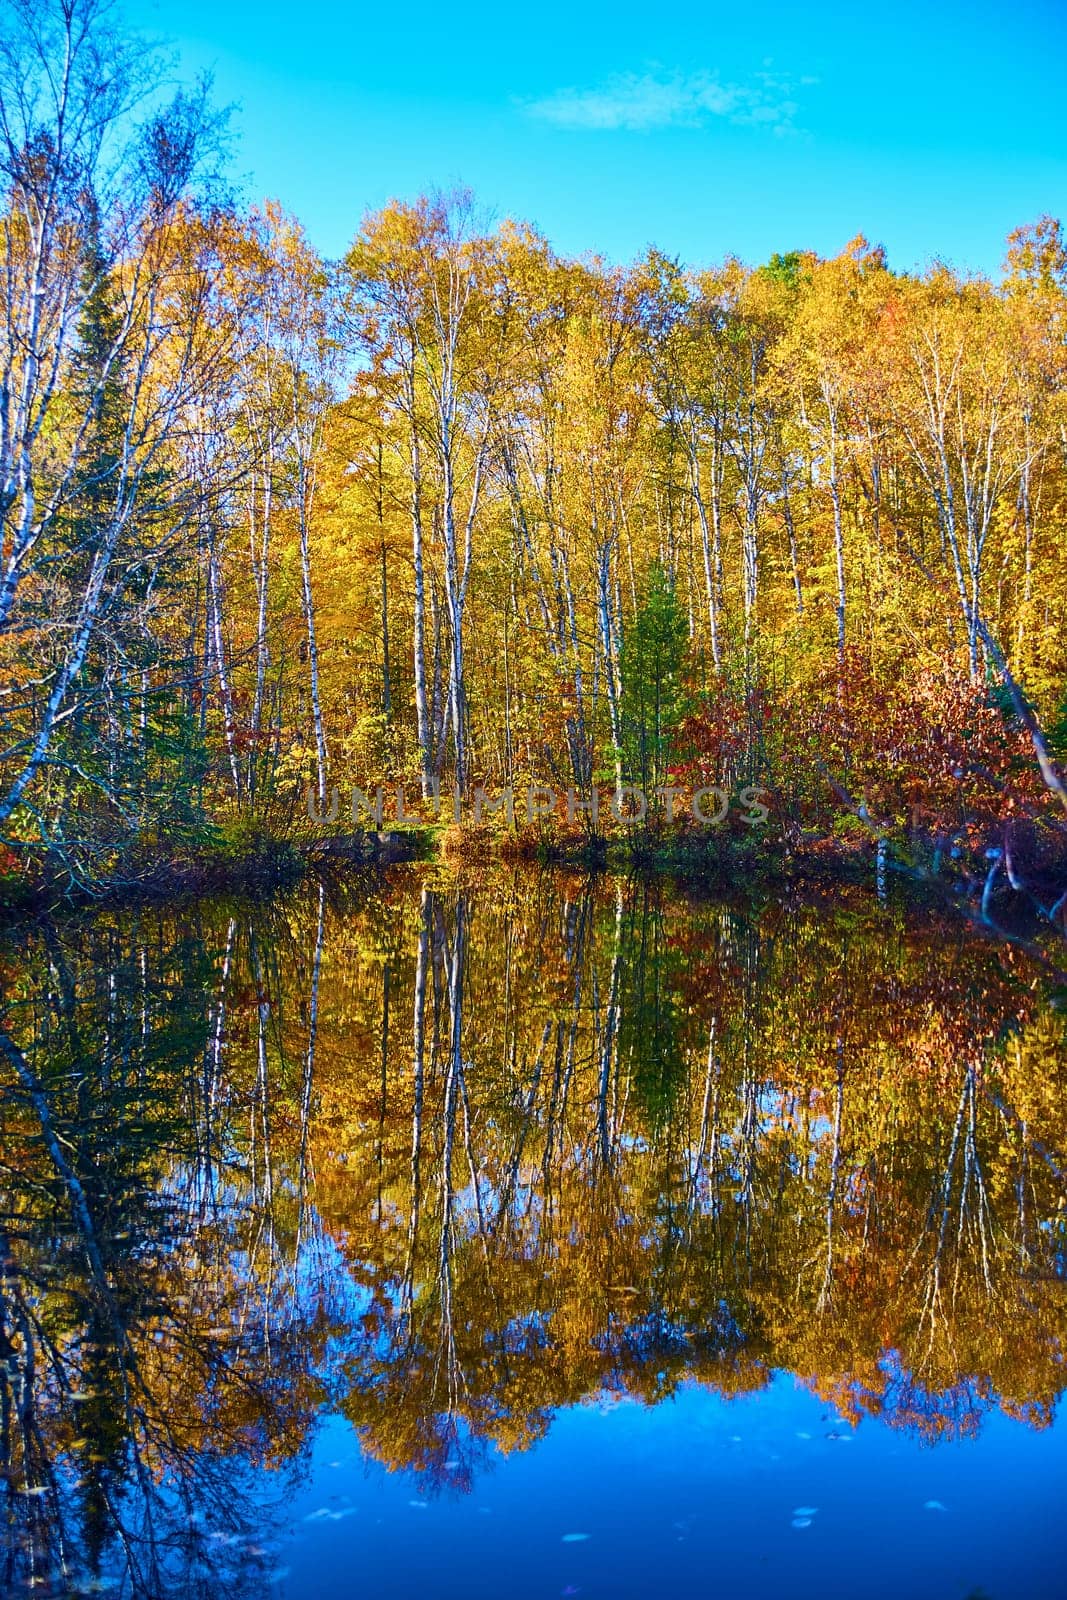 Vibrant Autumn Splendor in Michigan's Hungarian Falls, 2017 - Serene Reflection of Deciduous Forest on Calm Lake